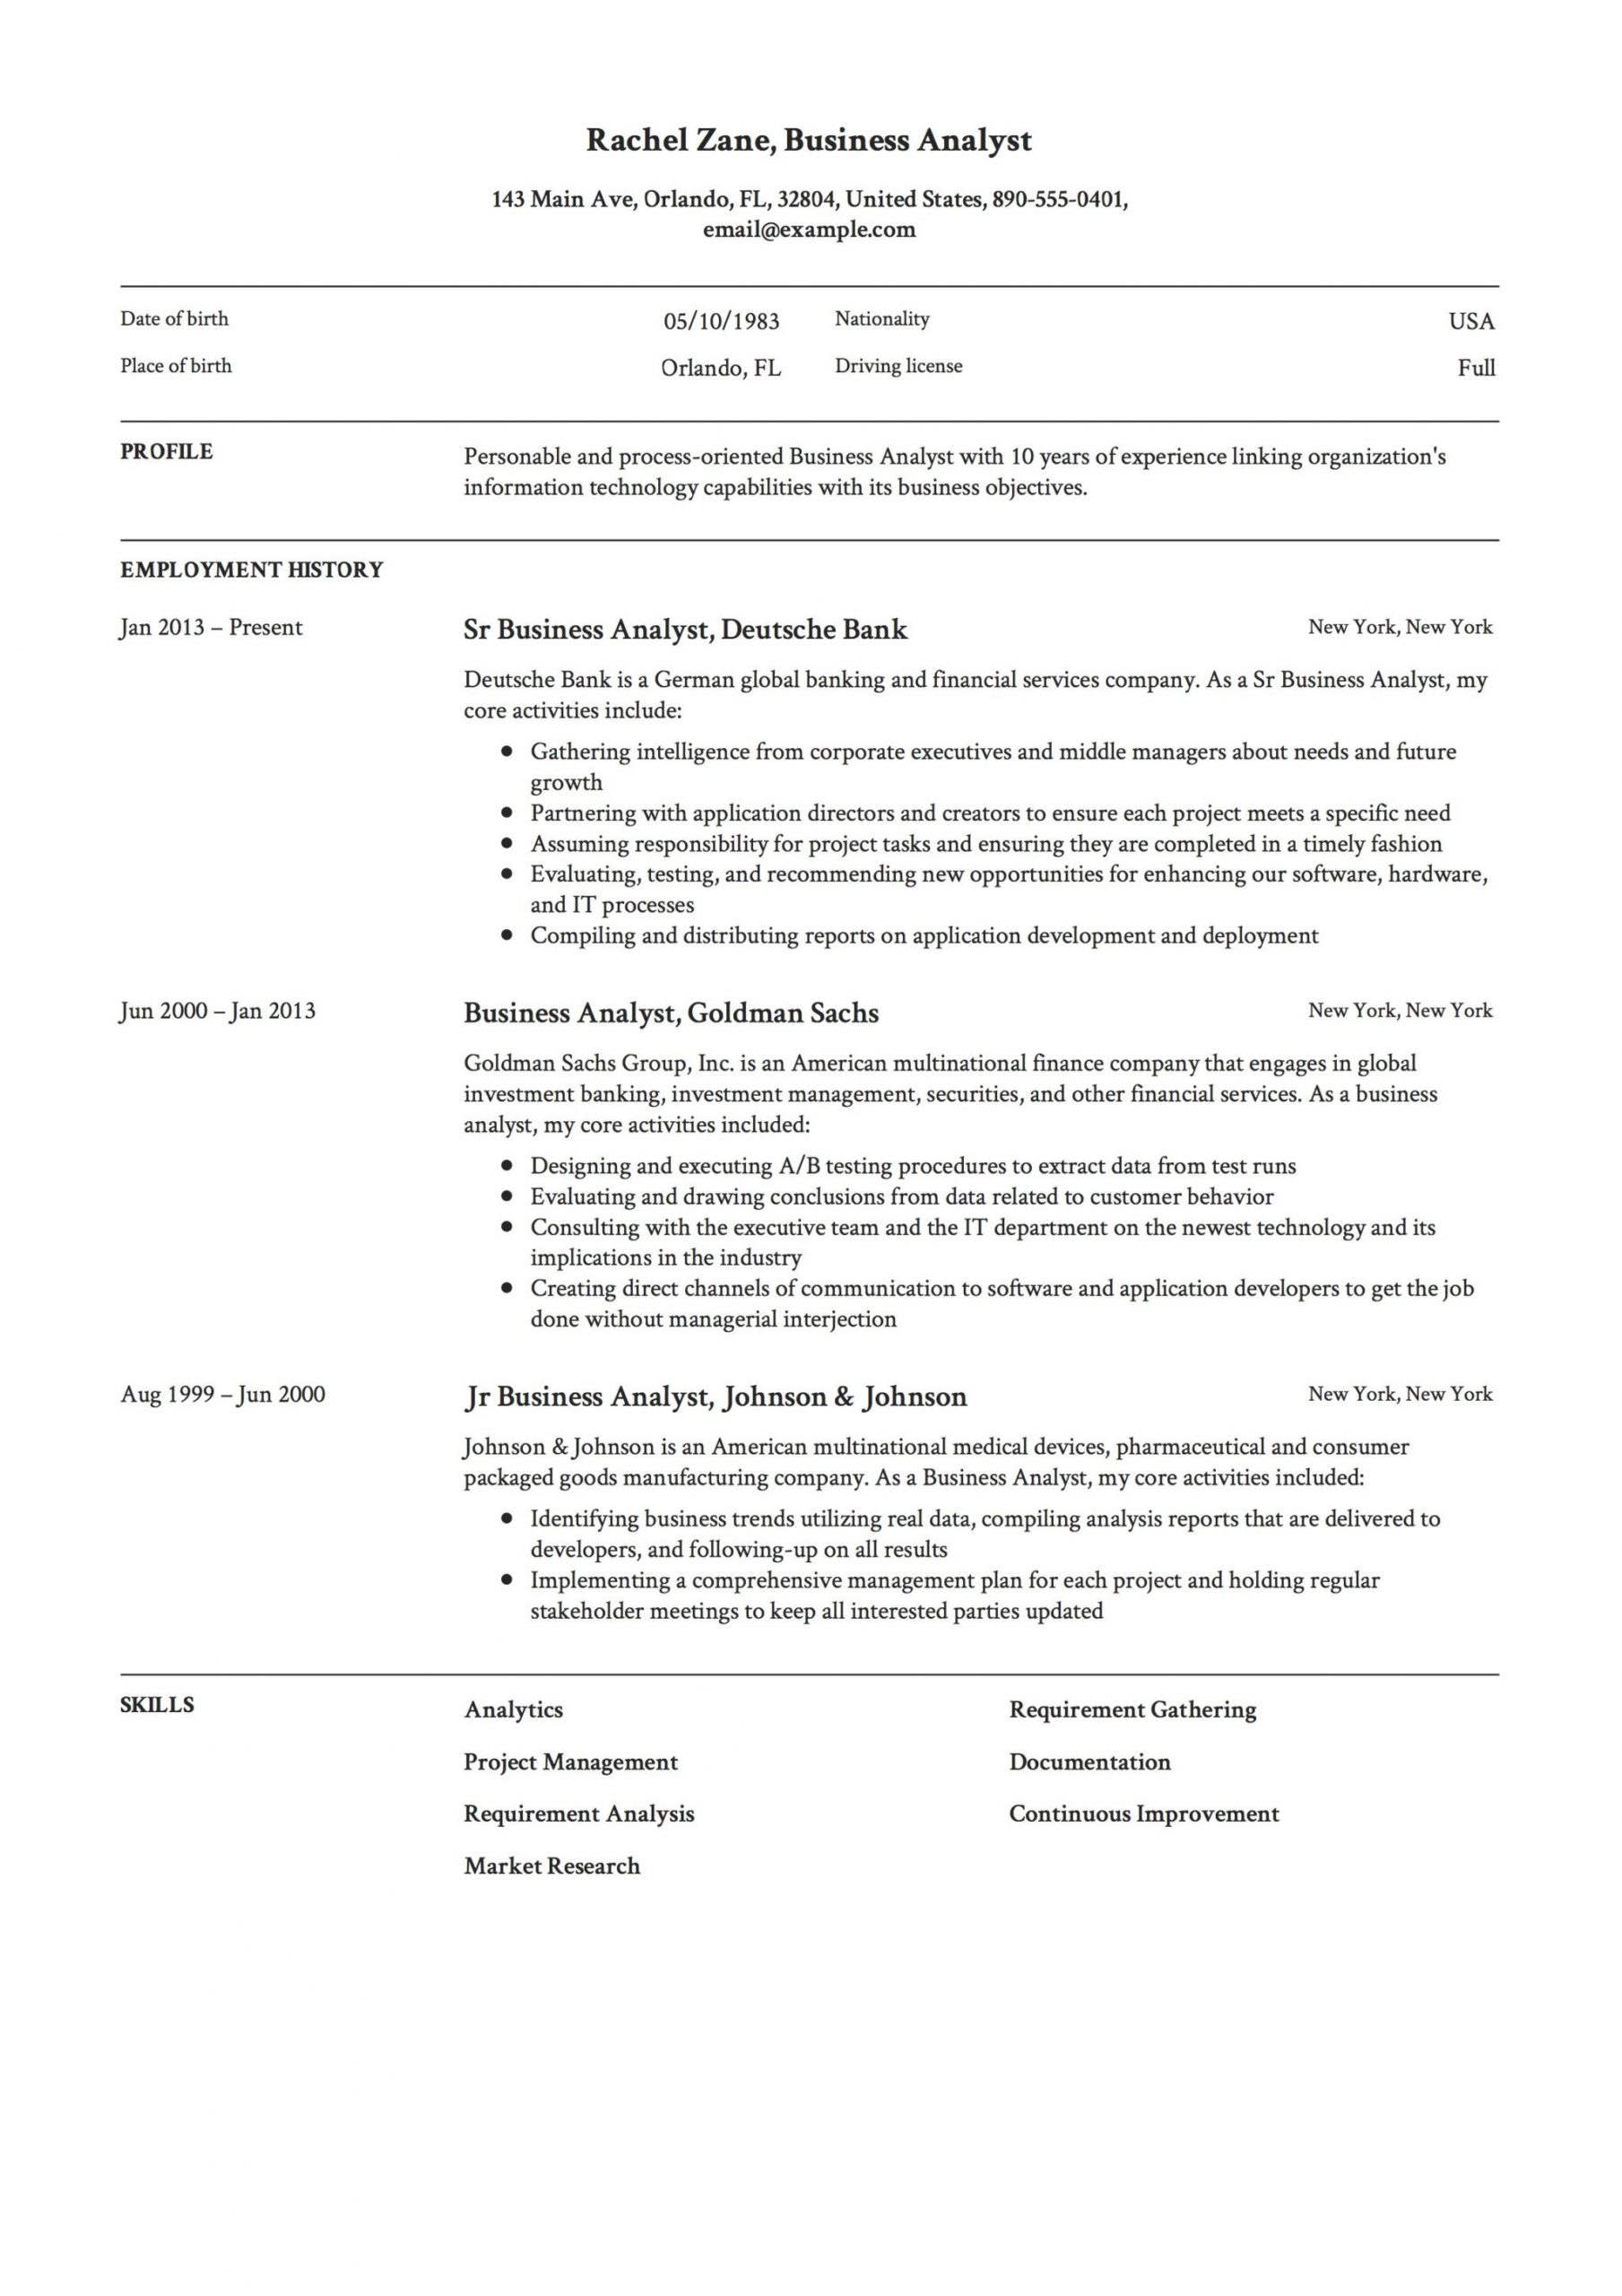 Business Analyst Resume Samples for Experienced Business Analyst Resume & Guide 12 Templates